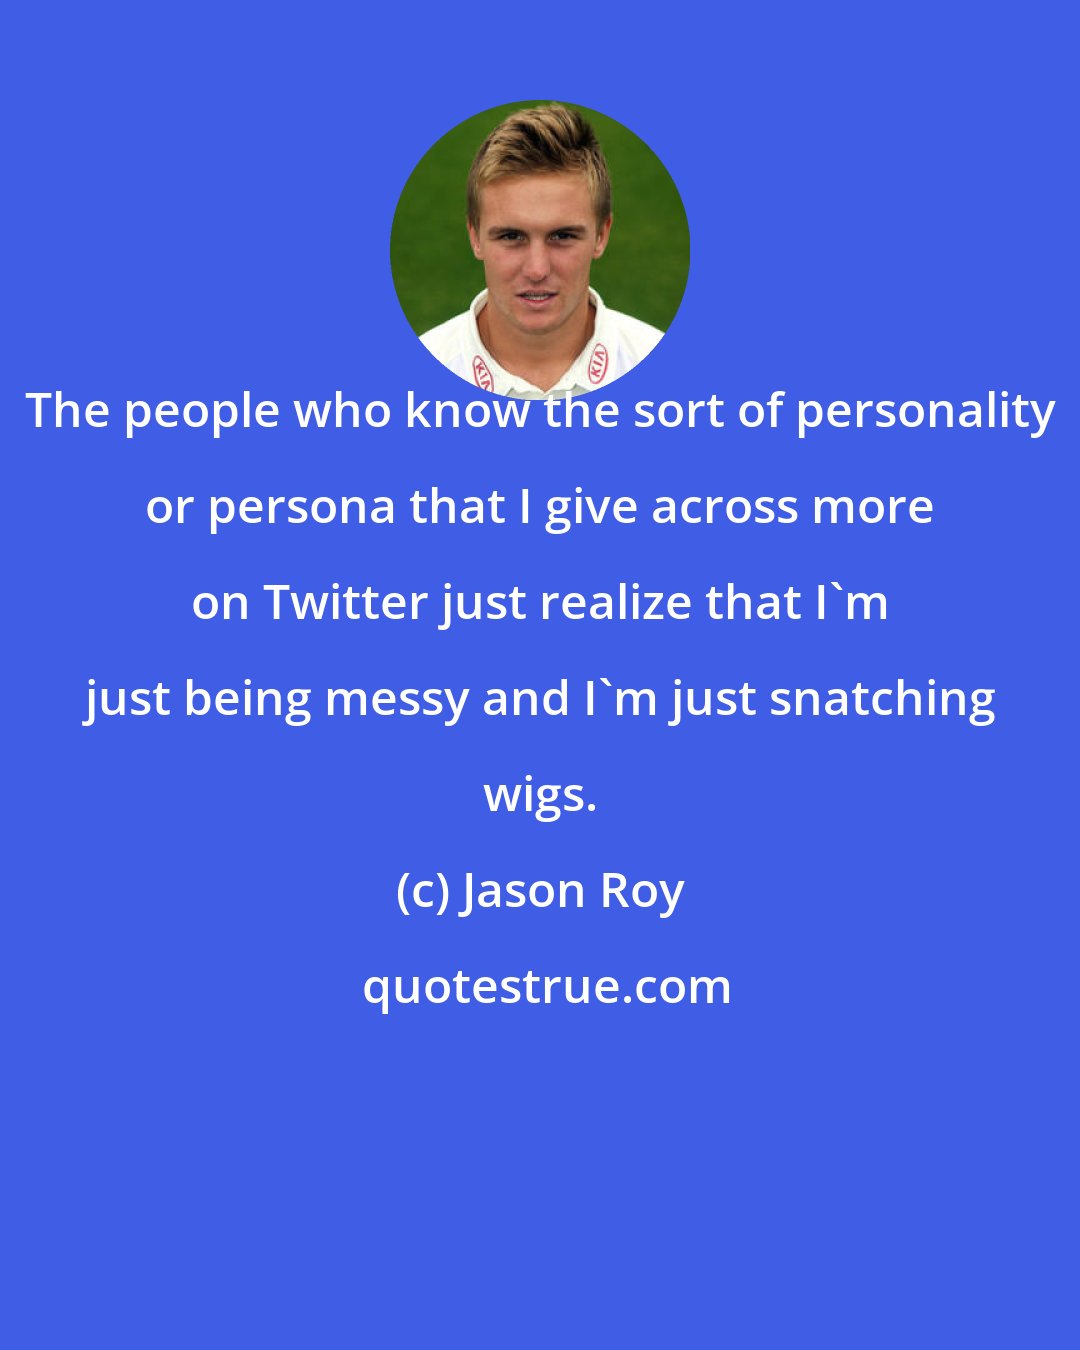 Jason Roy: The people who know the sort of personality or persona that I give across more on Twitter just realize that I'm just being messy and I'm just snatching wigs.